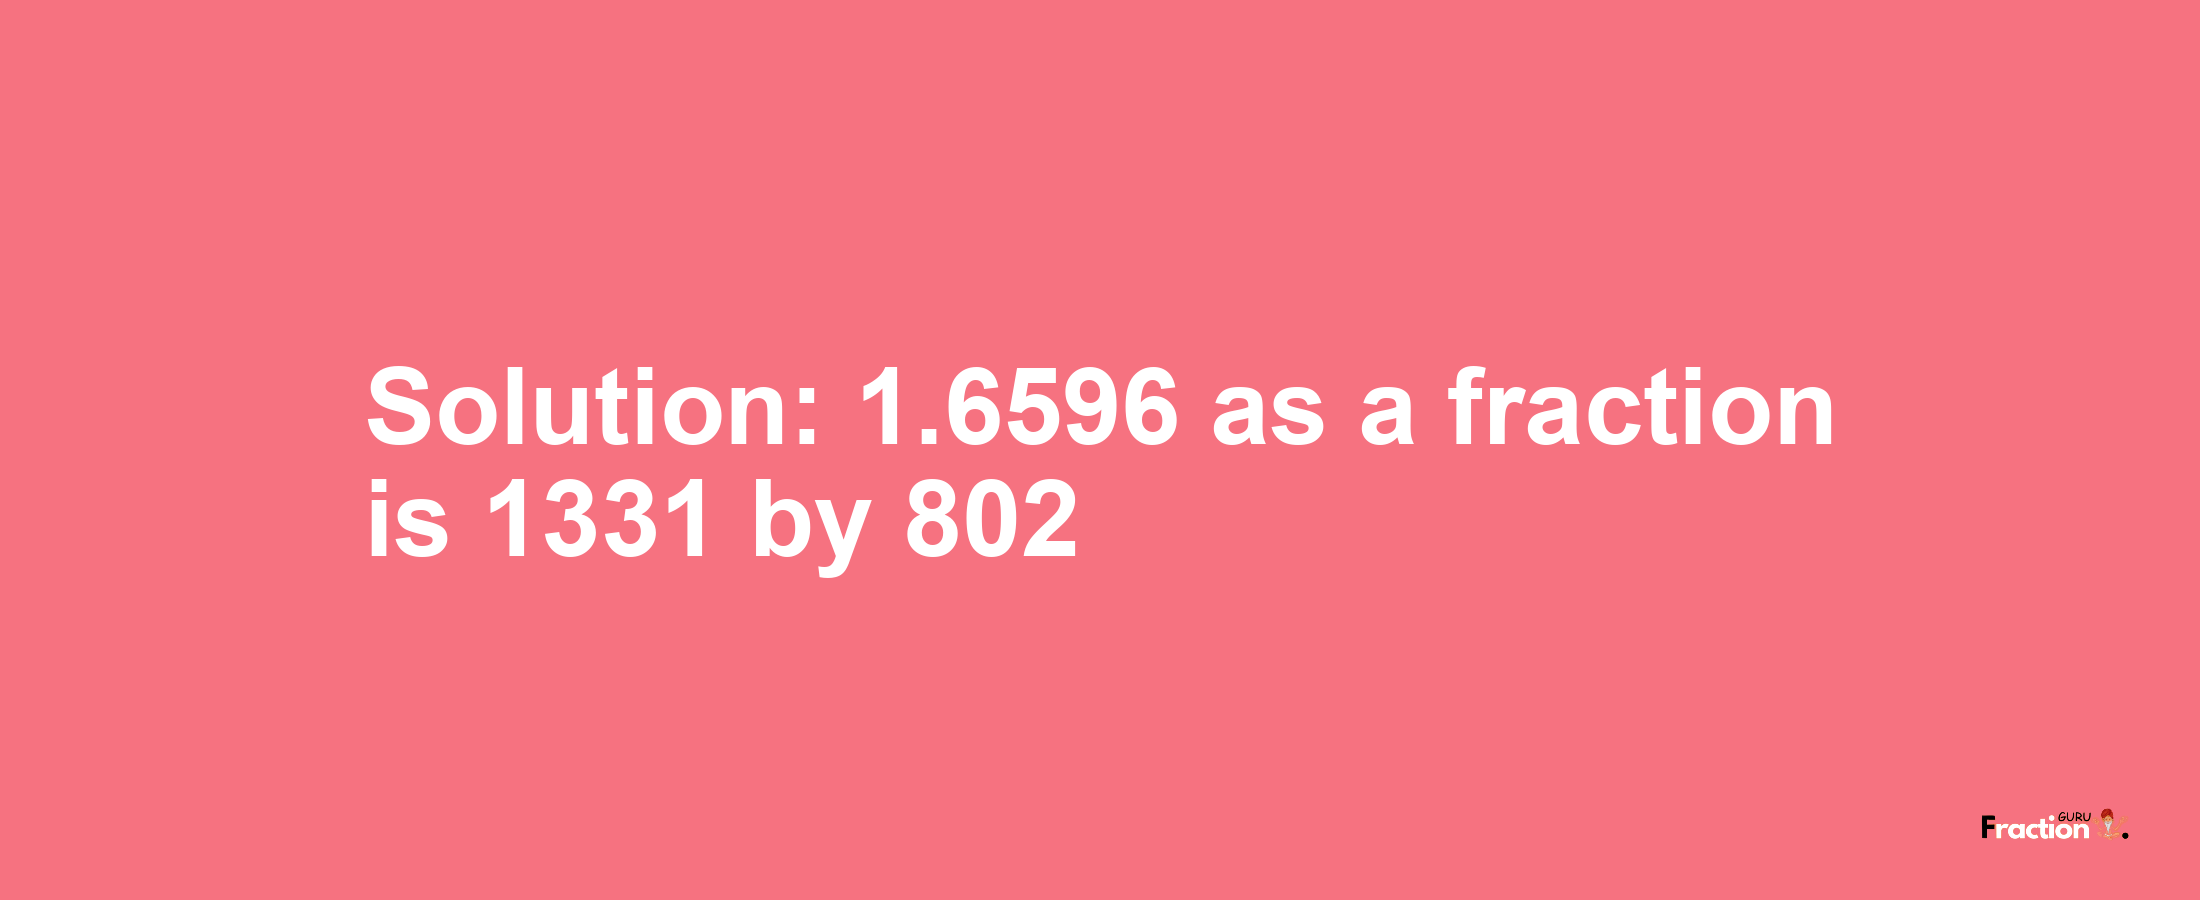 Solution:1.6596 as a fraction is 1331/802